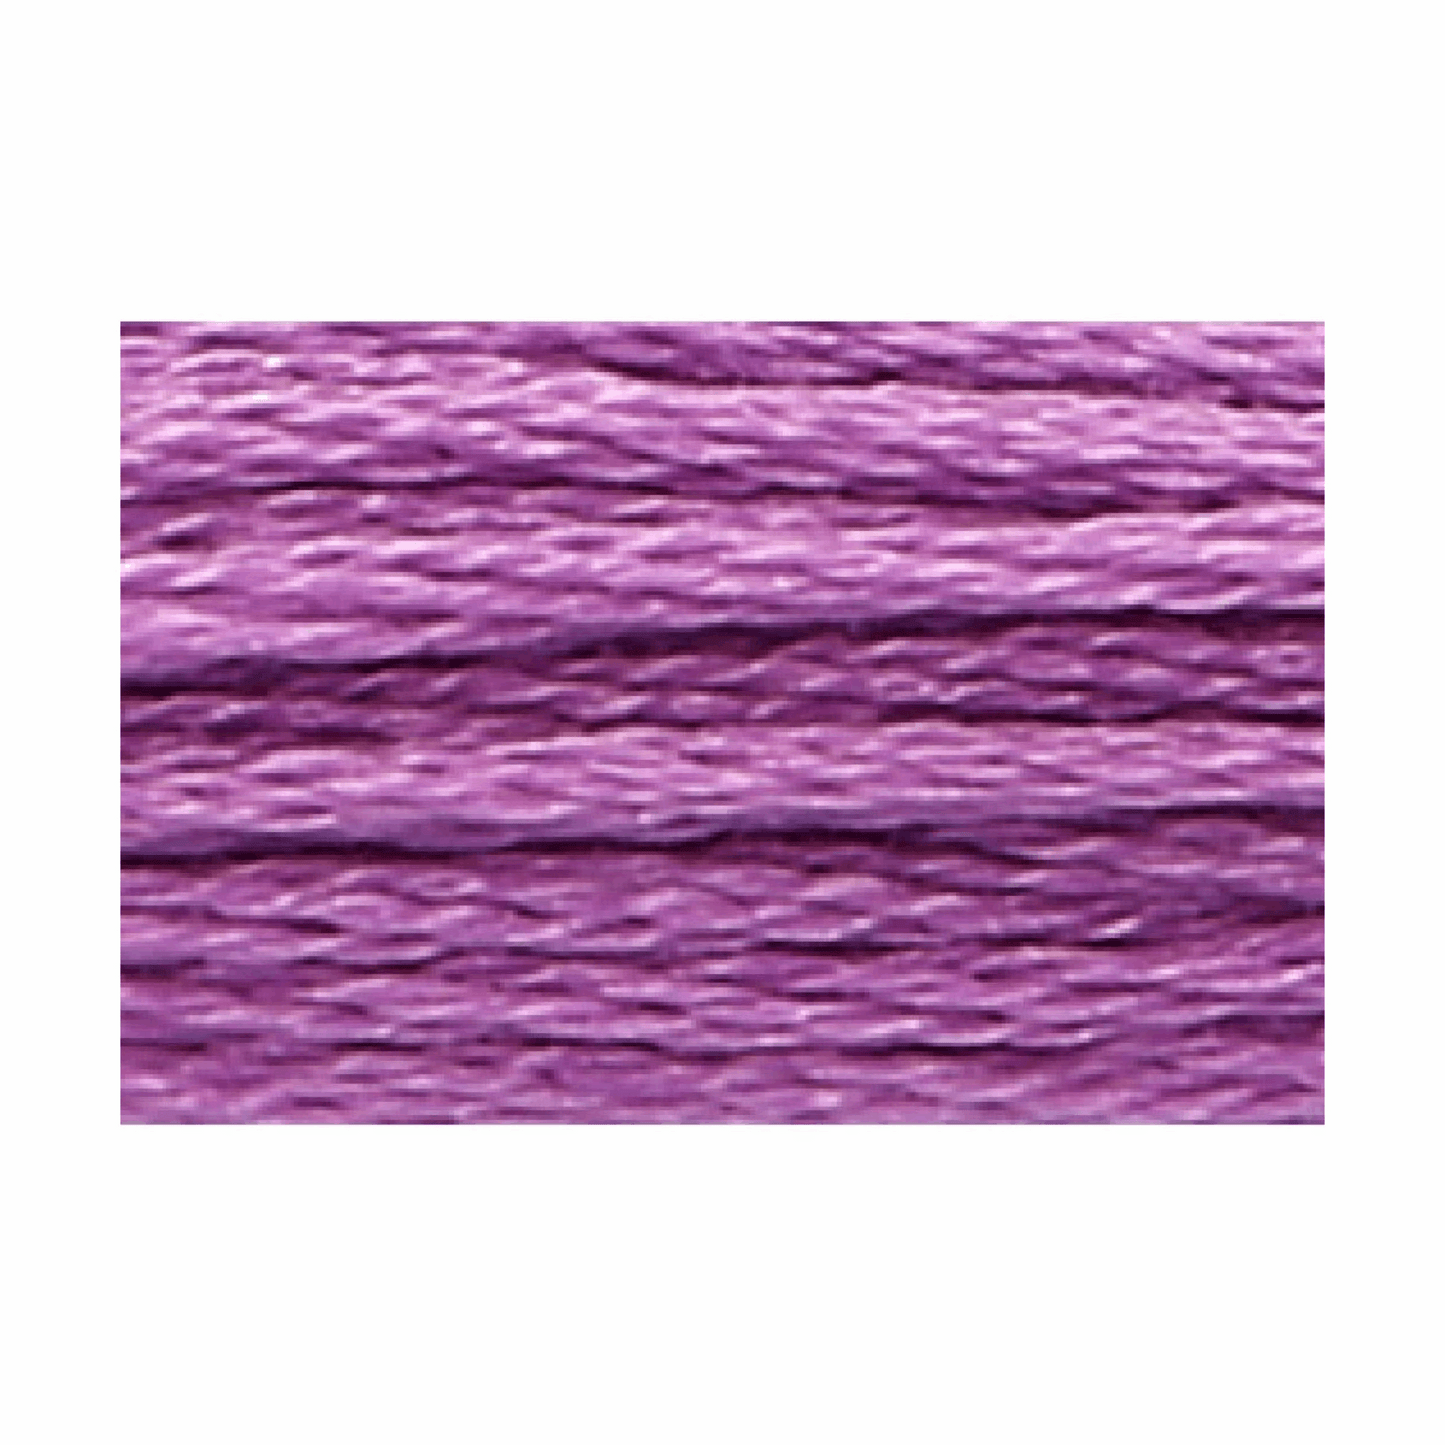 Anchor matt embroidery thread 10m, 5 times lightly twisted, color purple 98